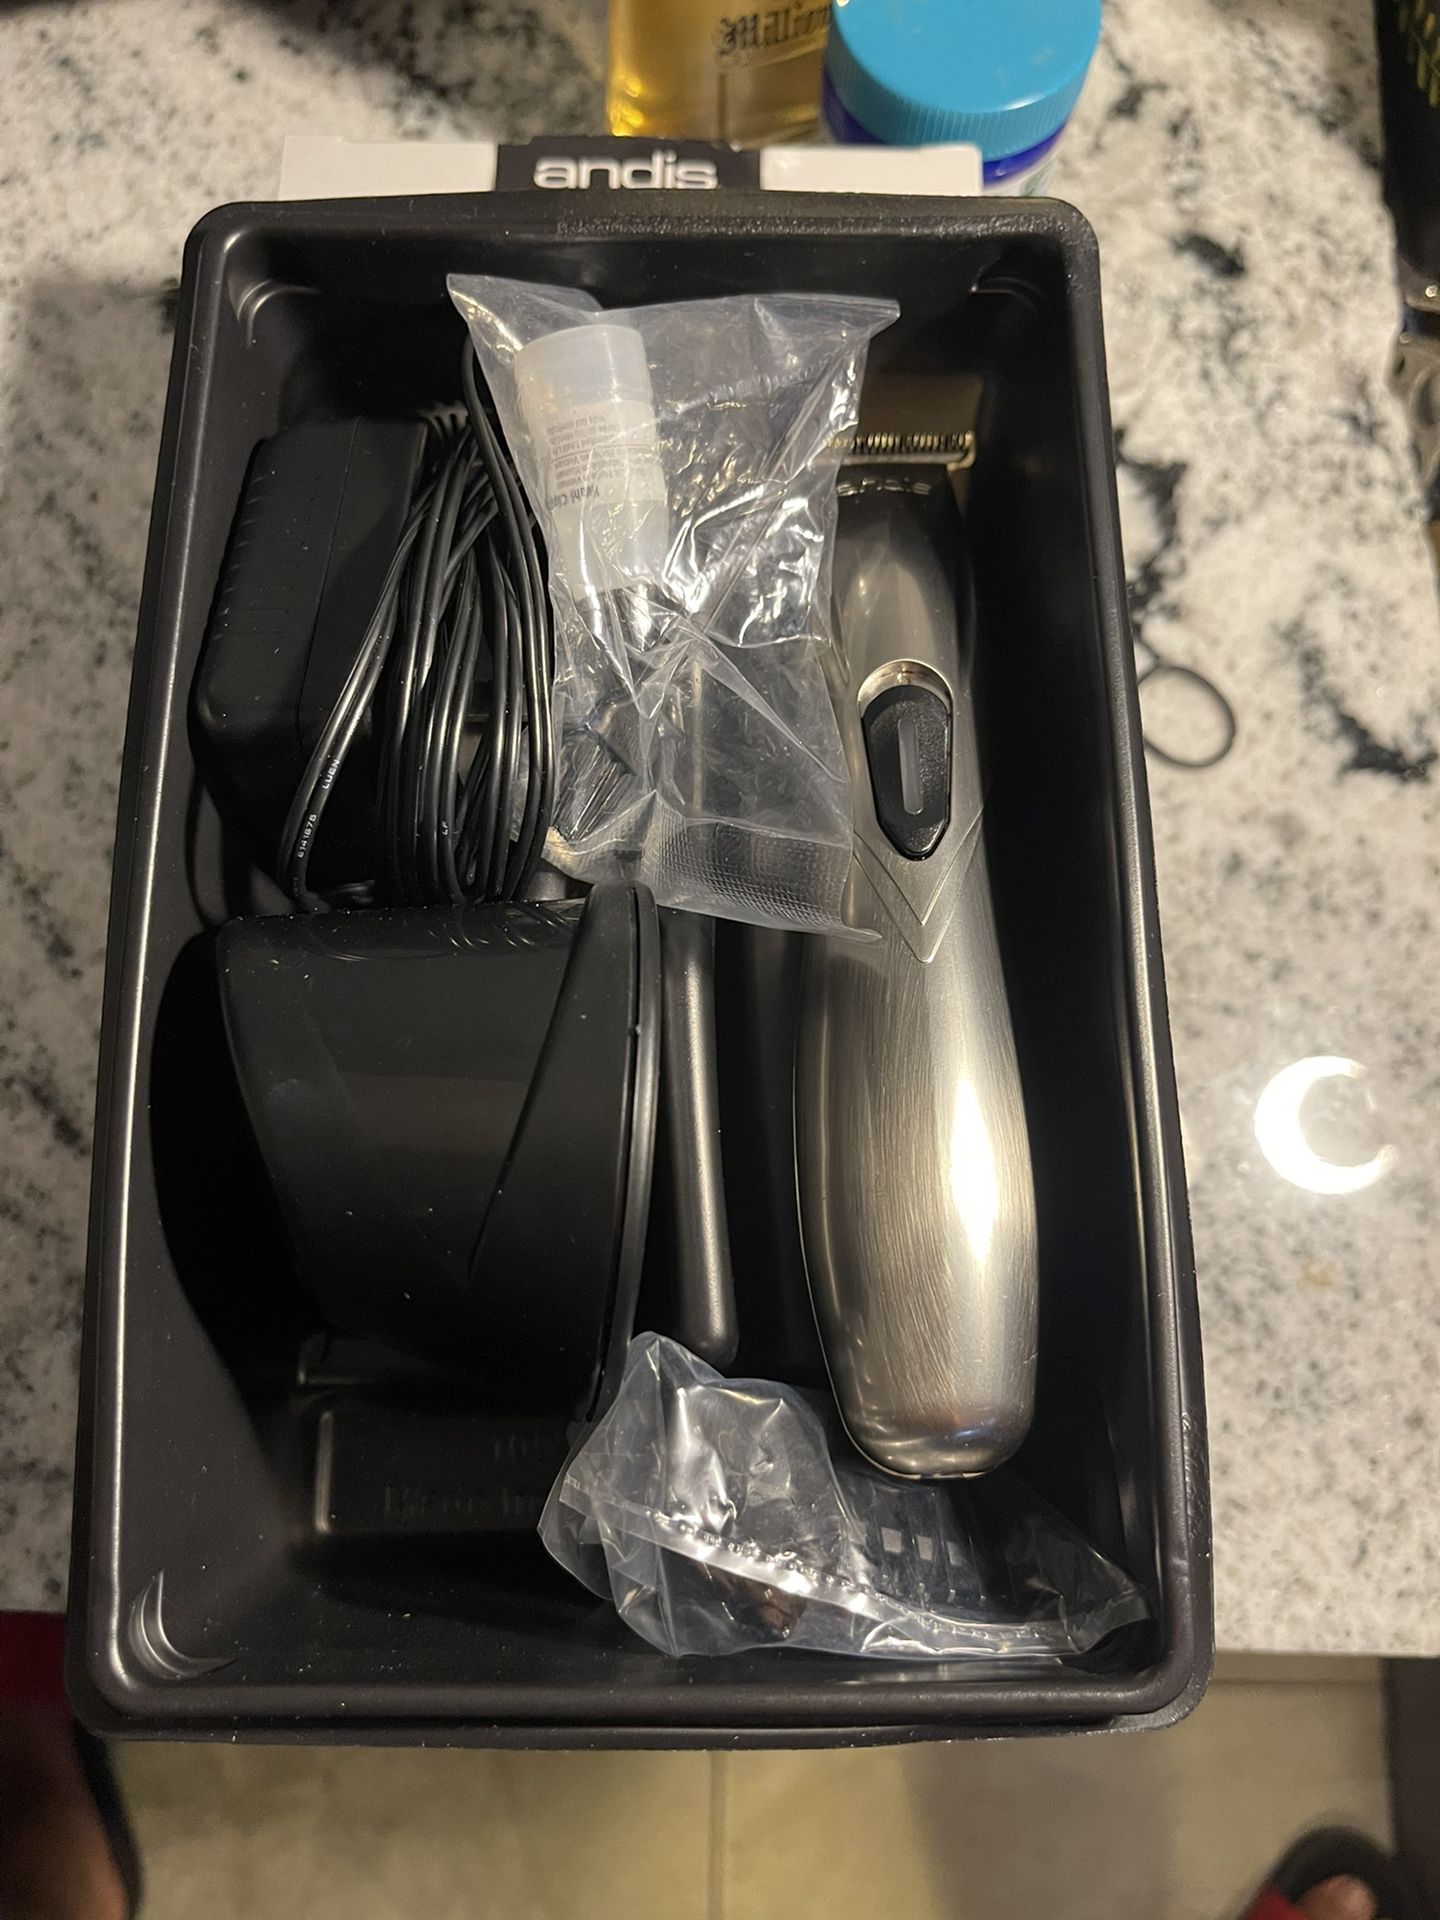 BARBER KIT / Wahl Magic Clippers/ Andis Shaver / Slim Pro 